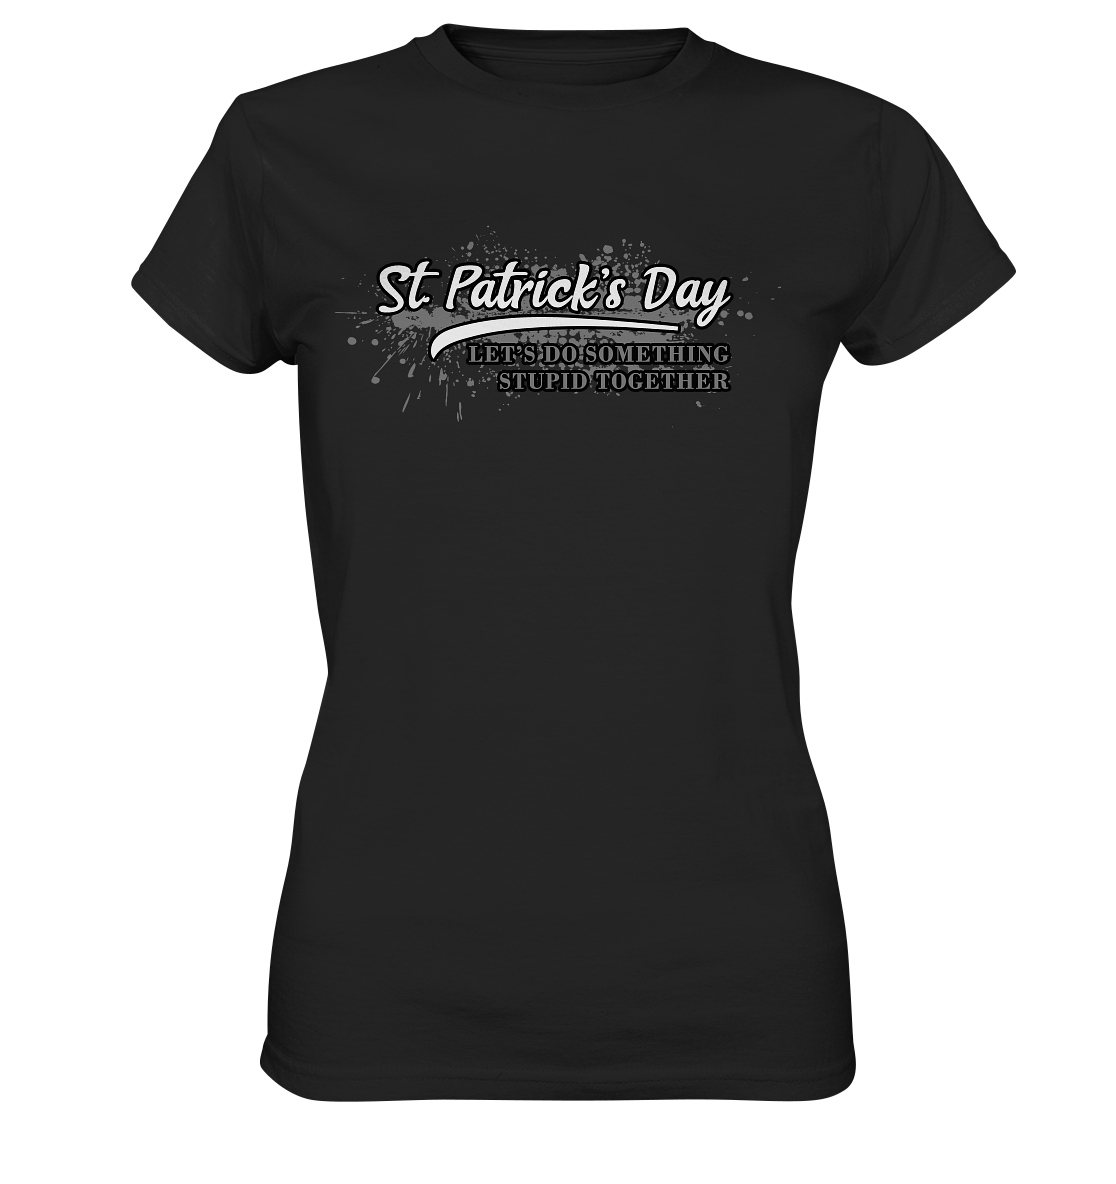 St. Patrick's Day "Let's Do Something Stupid Together" - Ladies Premium Shirt